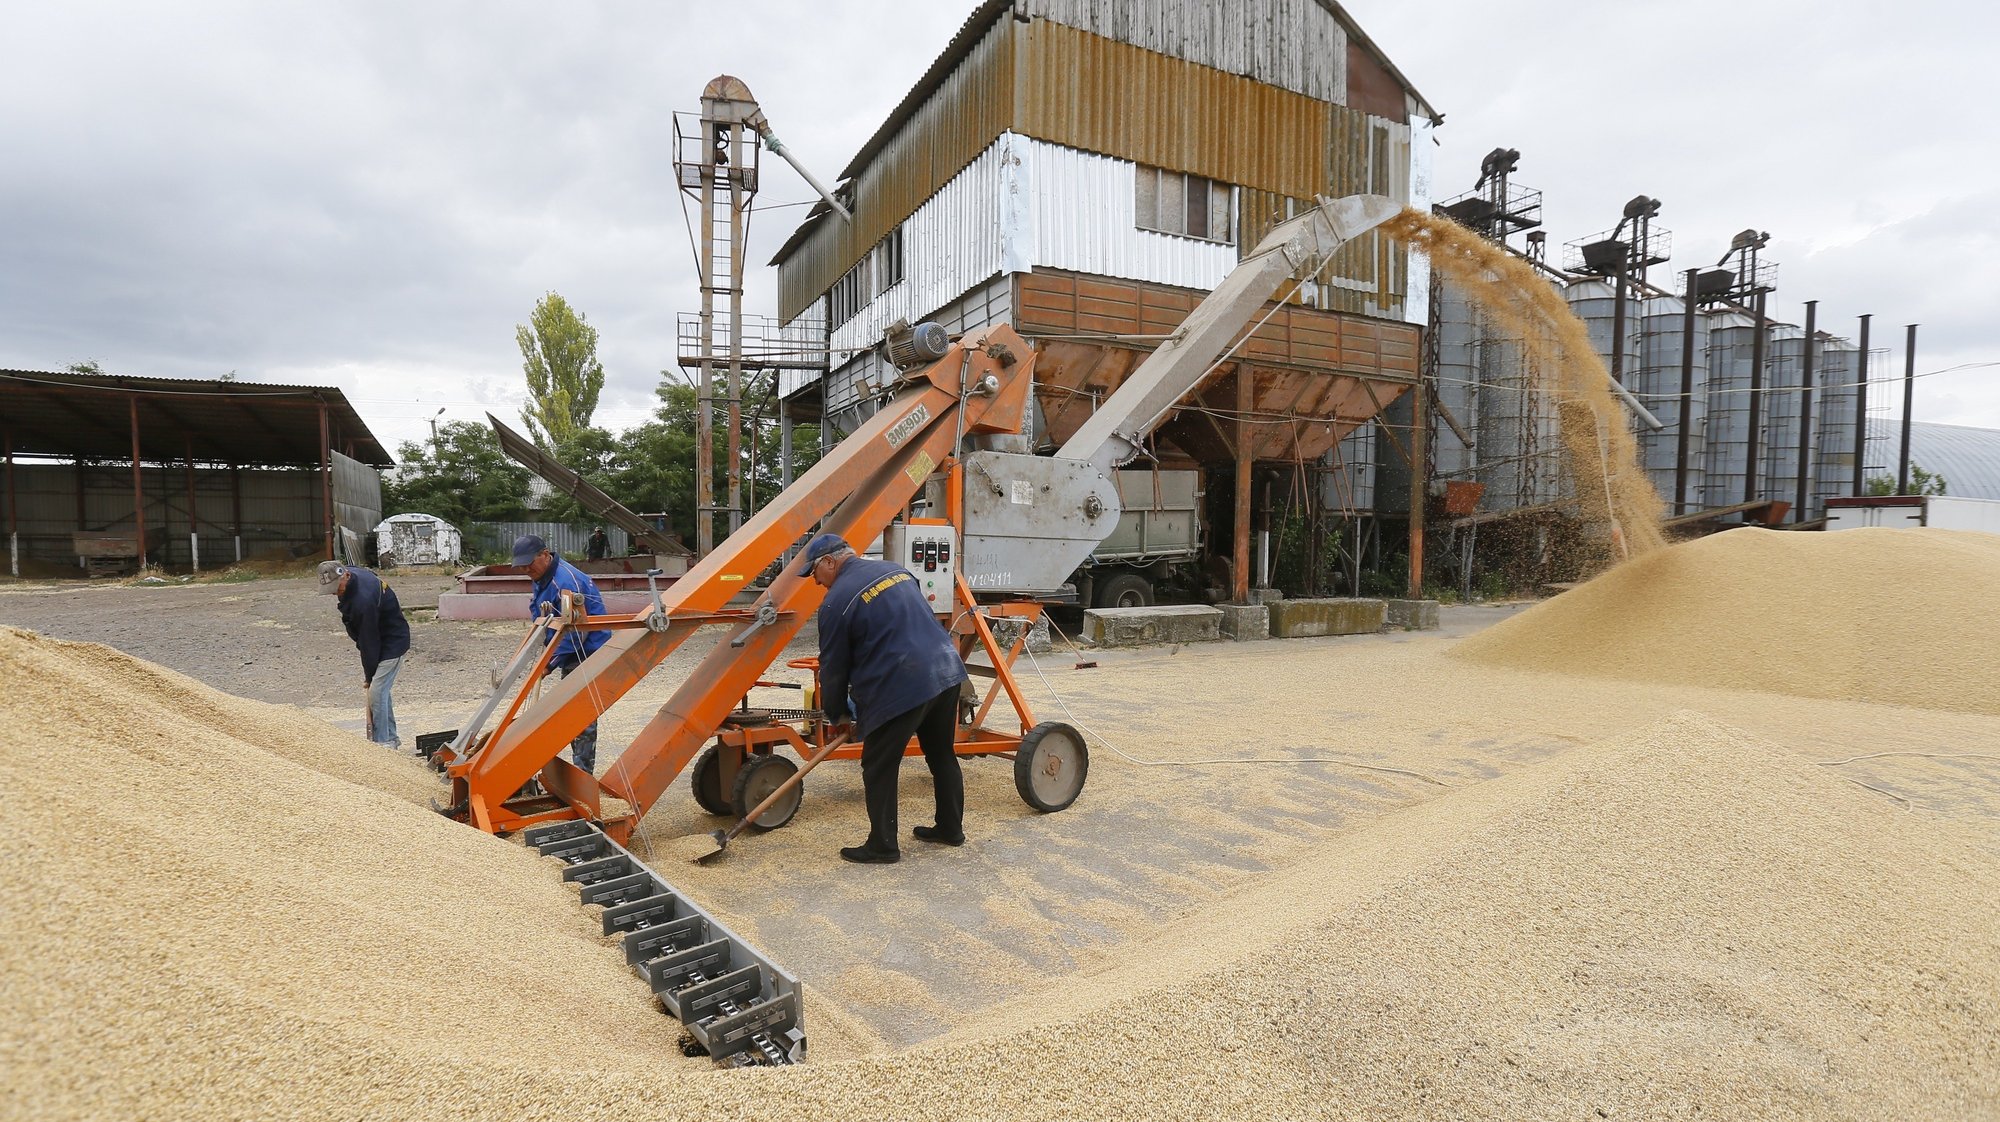 epa10030719 Ukrainian farmers mix grain of barley and wheat at a magazine after harvest in Odesa area, Southern Ukraine, 23 June 2022. The Food and Agriculture Organization (FAO) of the United Nations said in its 10 June note assessing the risks emanating from the conflict in Ukraine that &#039;the current war raises concerns over whether crops will be harvested. It has already led to the closures of ports and oilseed crushing operations, affecting products intended for the export markets. These are taking a toll on the country&#039;s exports of grains and vegetable oils. On 24 February Russian troops entered Ukrainian territory starting a conflict that has provoked destruction and a humanitarian crisis.  EPA/STR